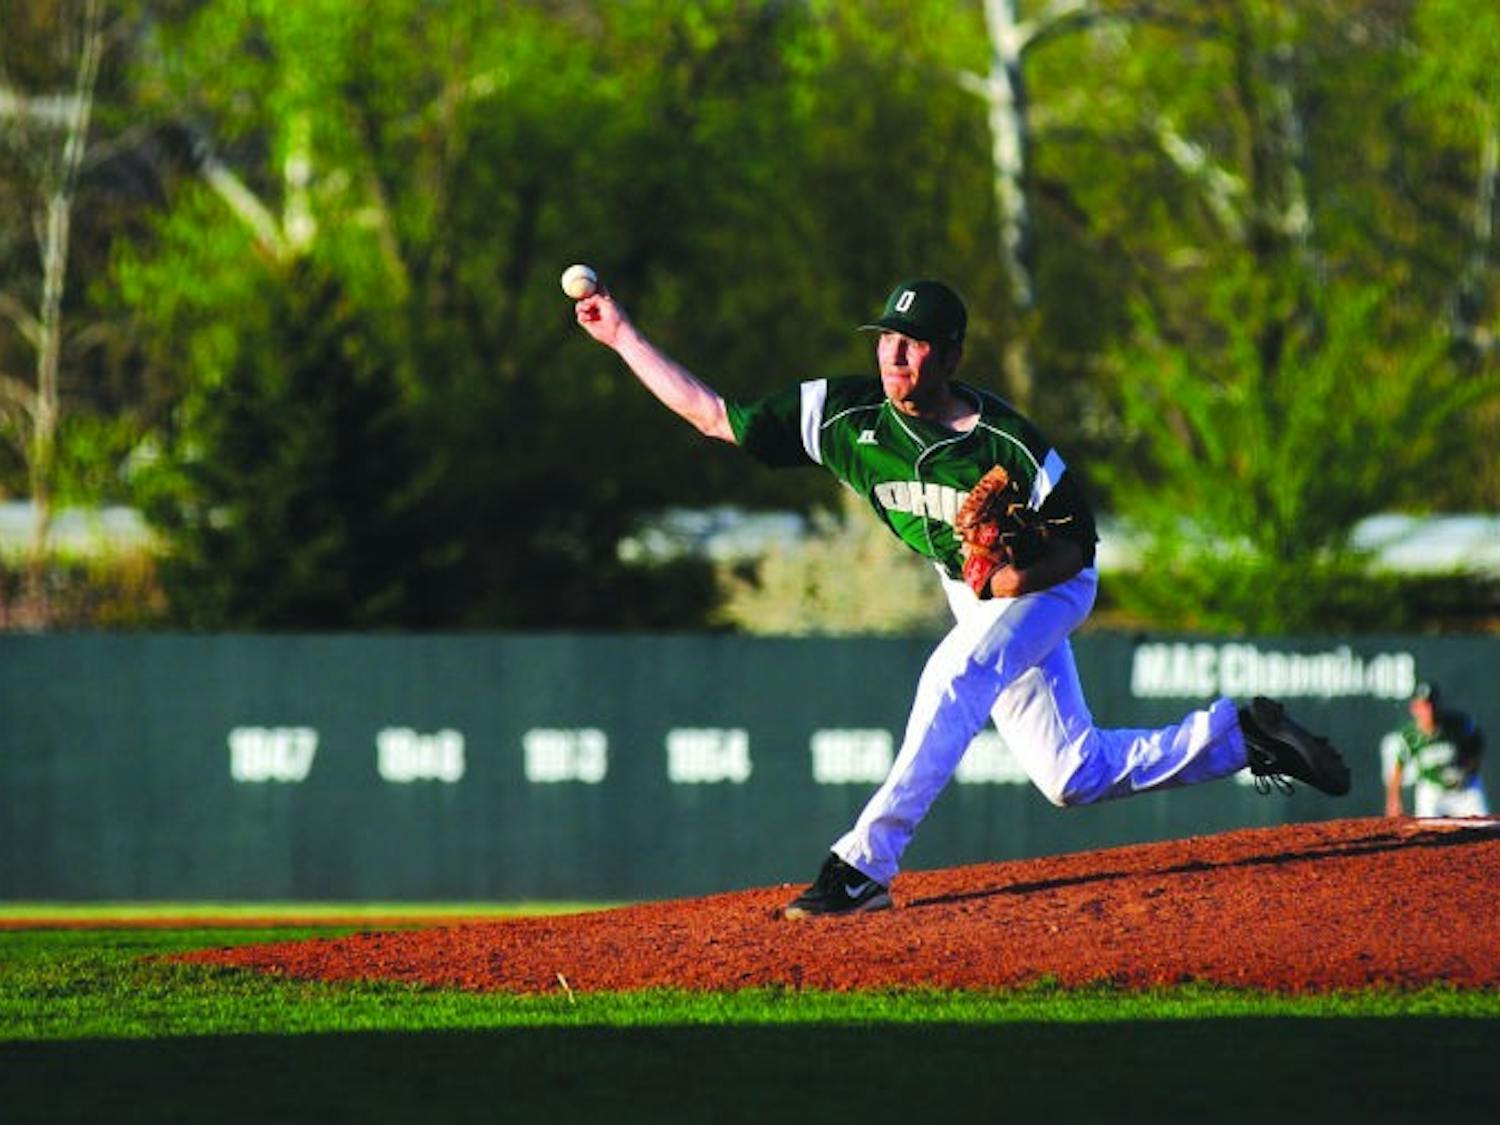 Baseball: Ohio slides into home victory over Otterbein after slow start  